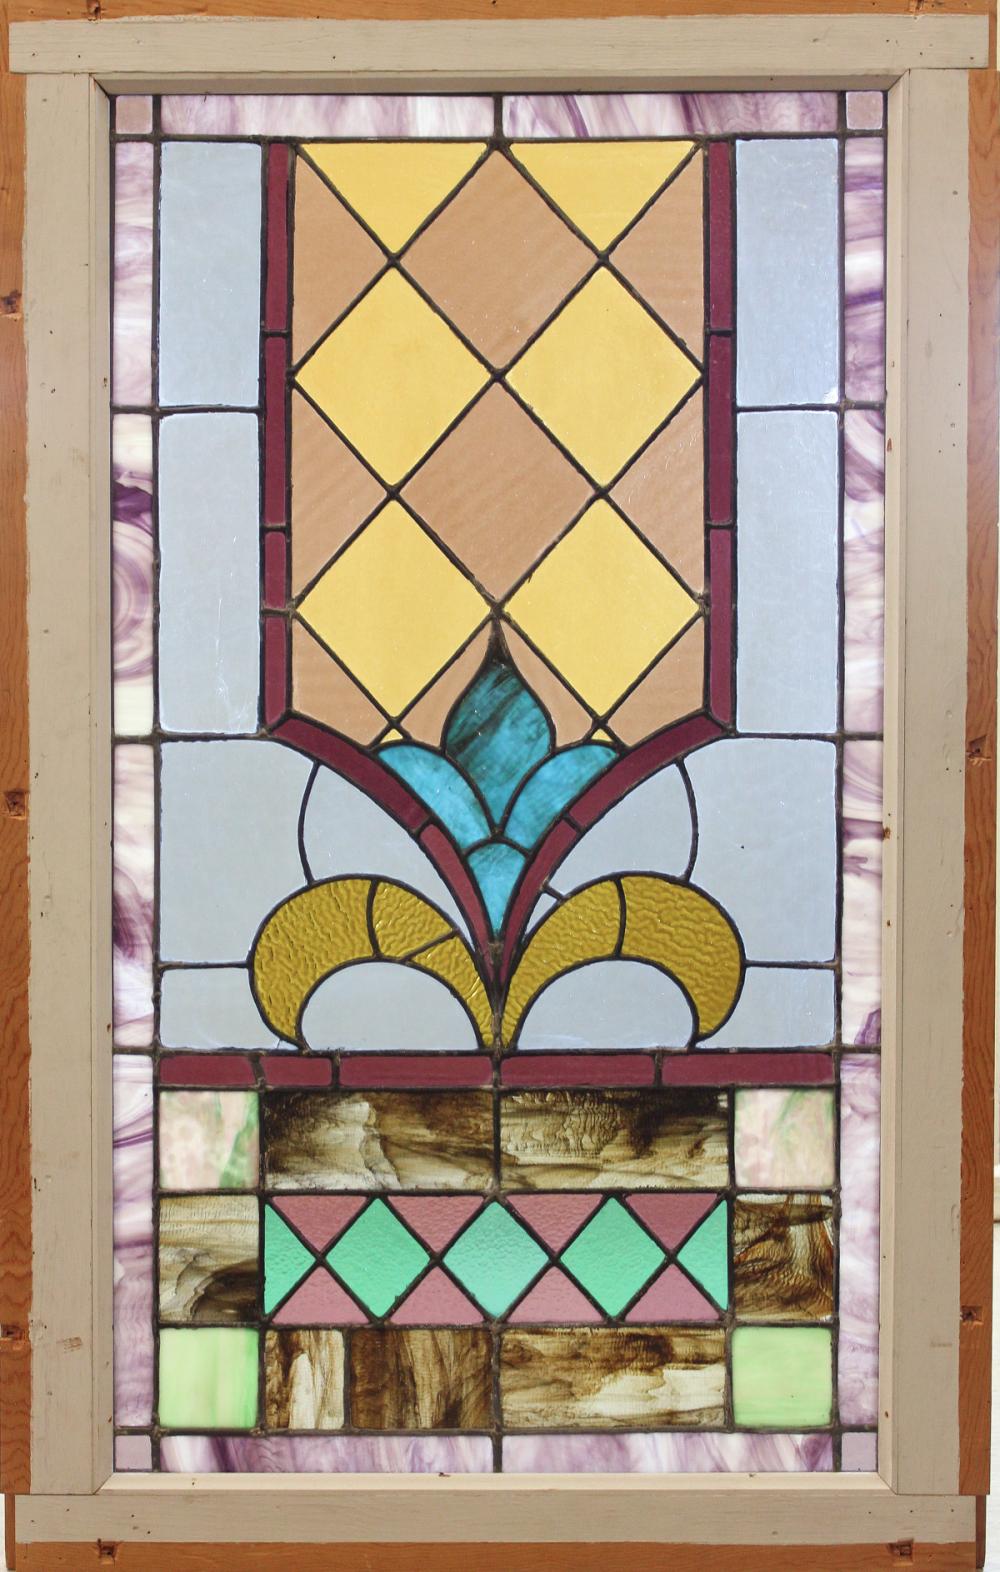 LATE VICTORIAN STAINED GLASS WINDOW  314b66